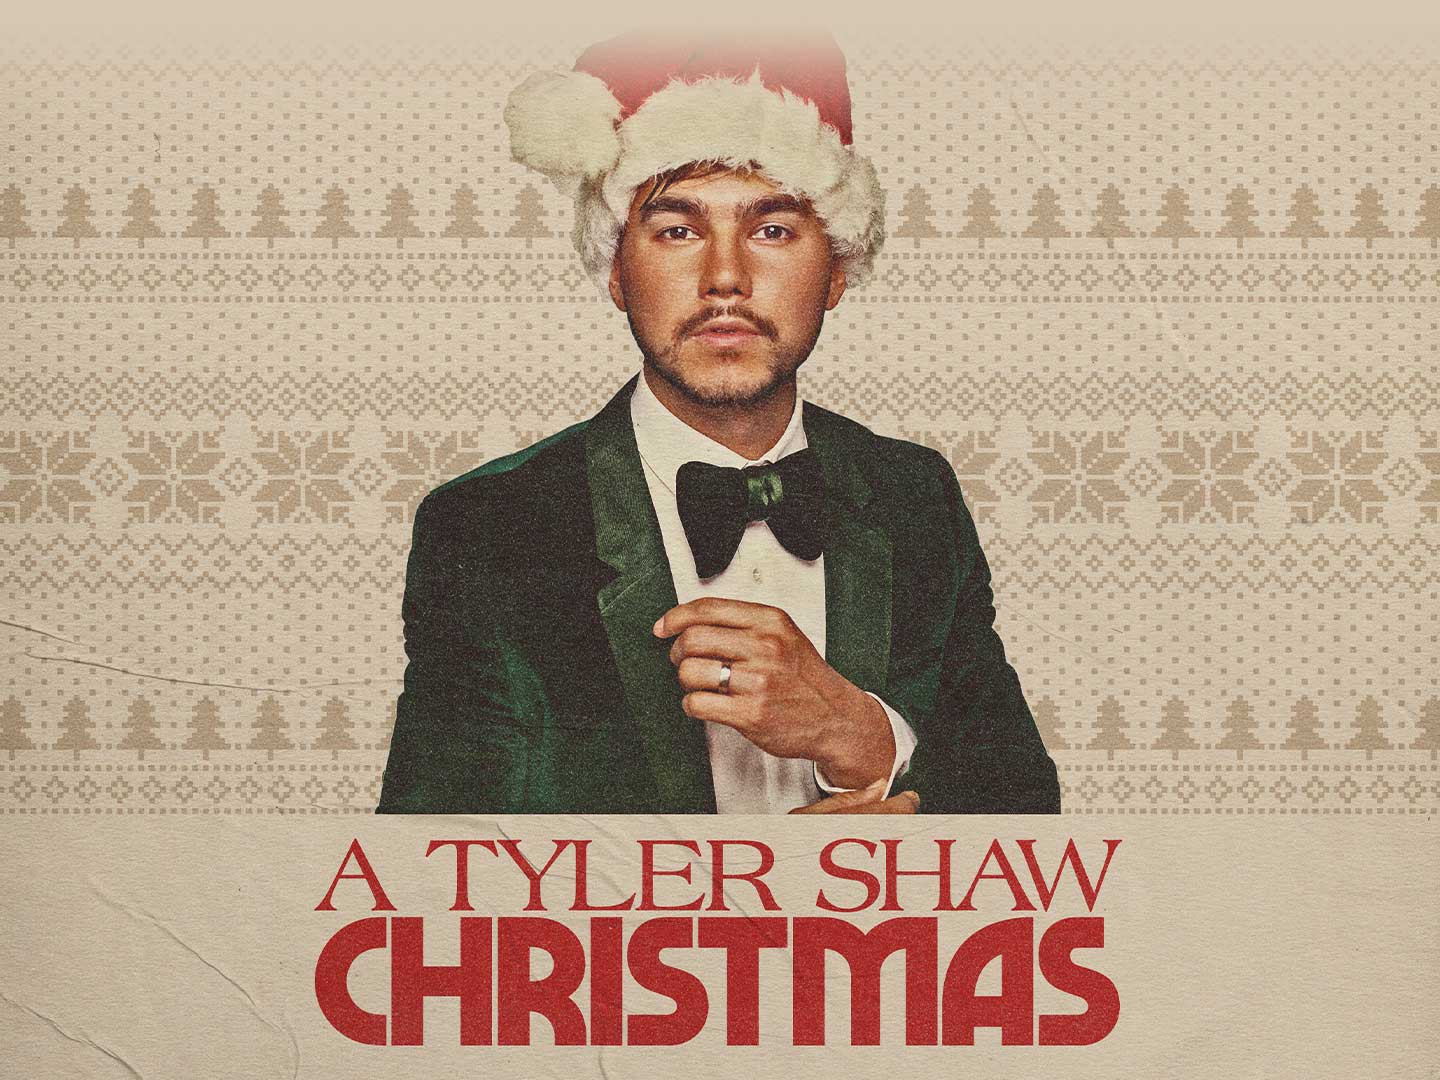 A Tyler Shaw Christmas